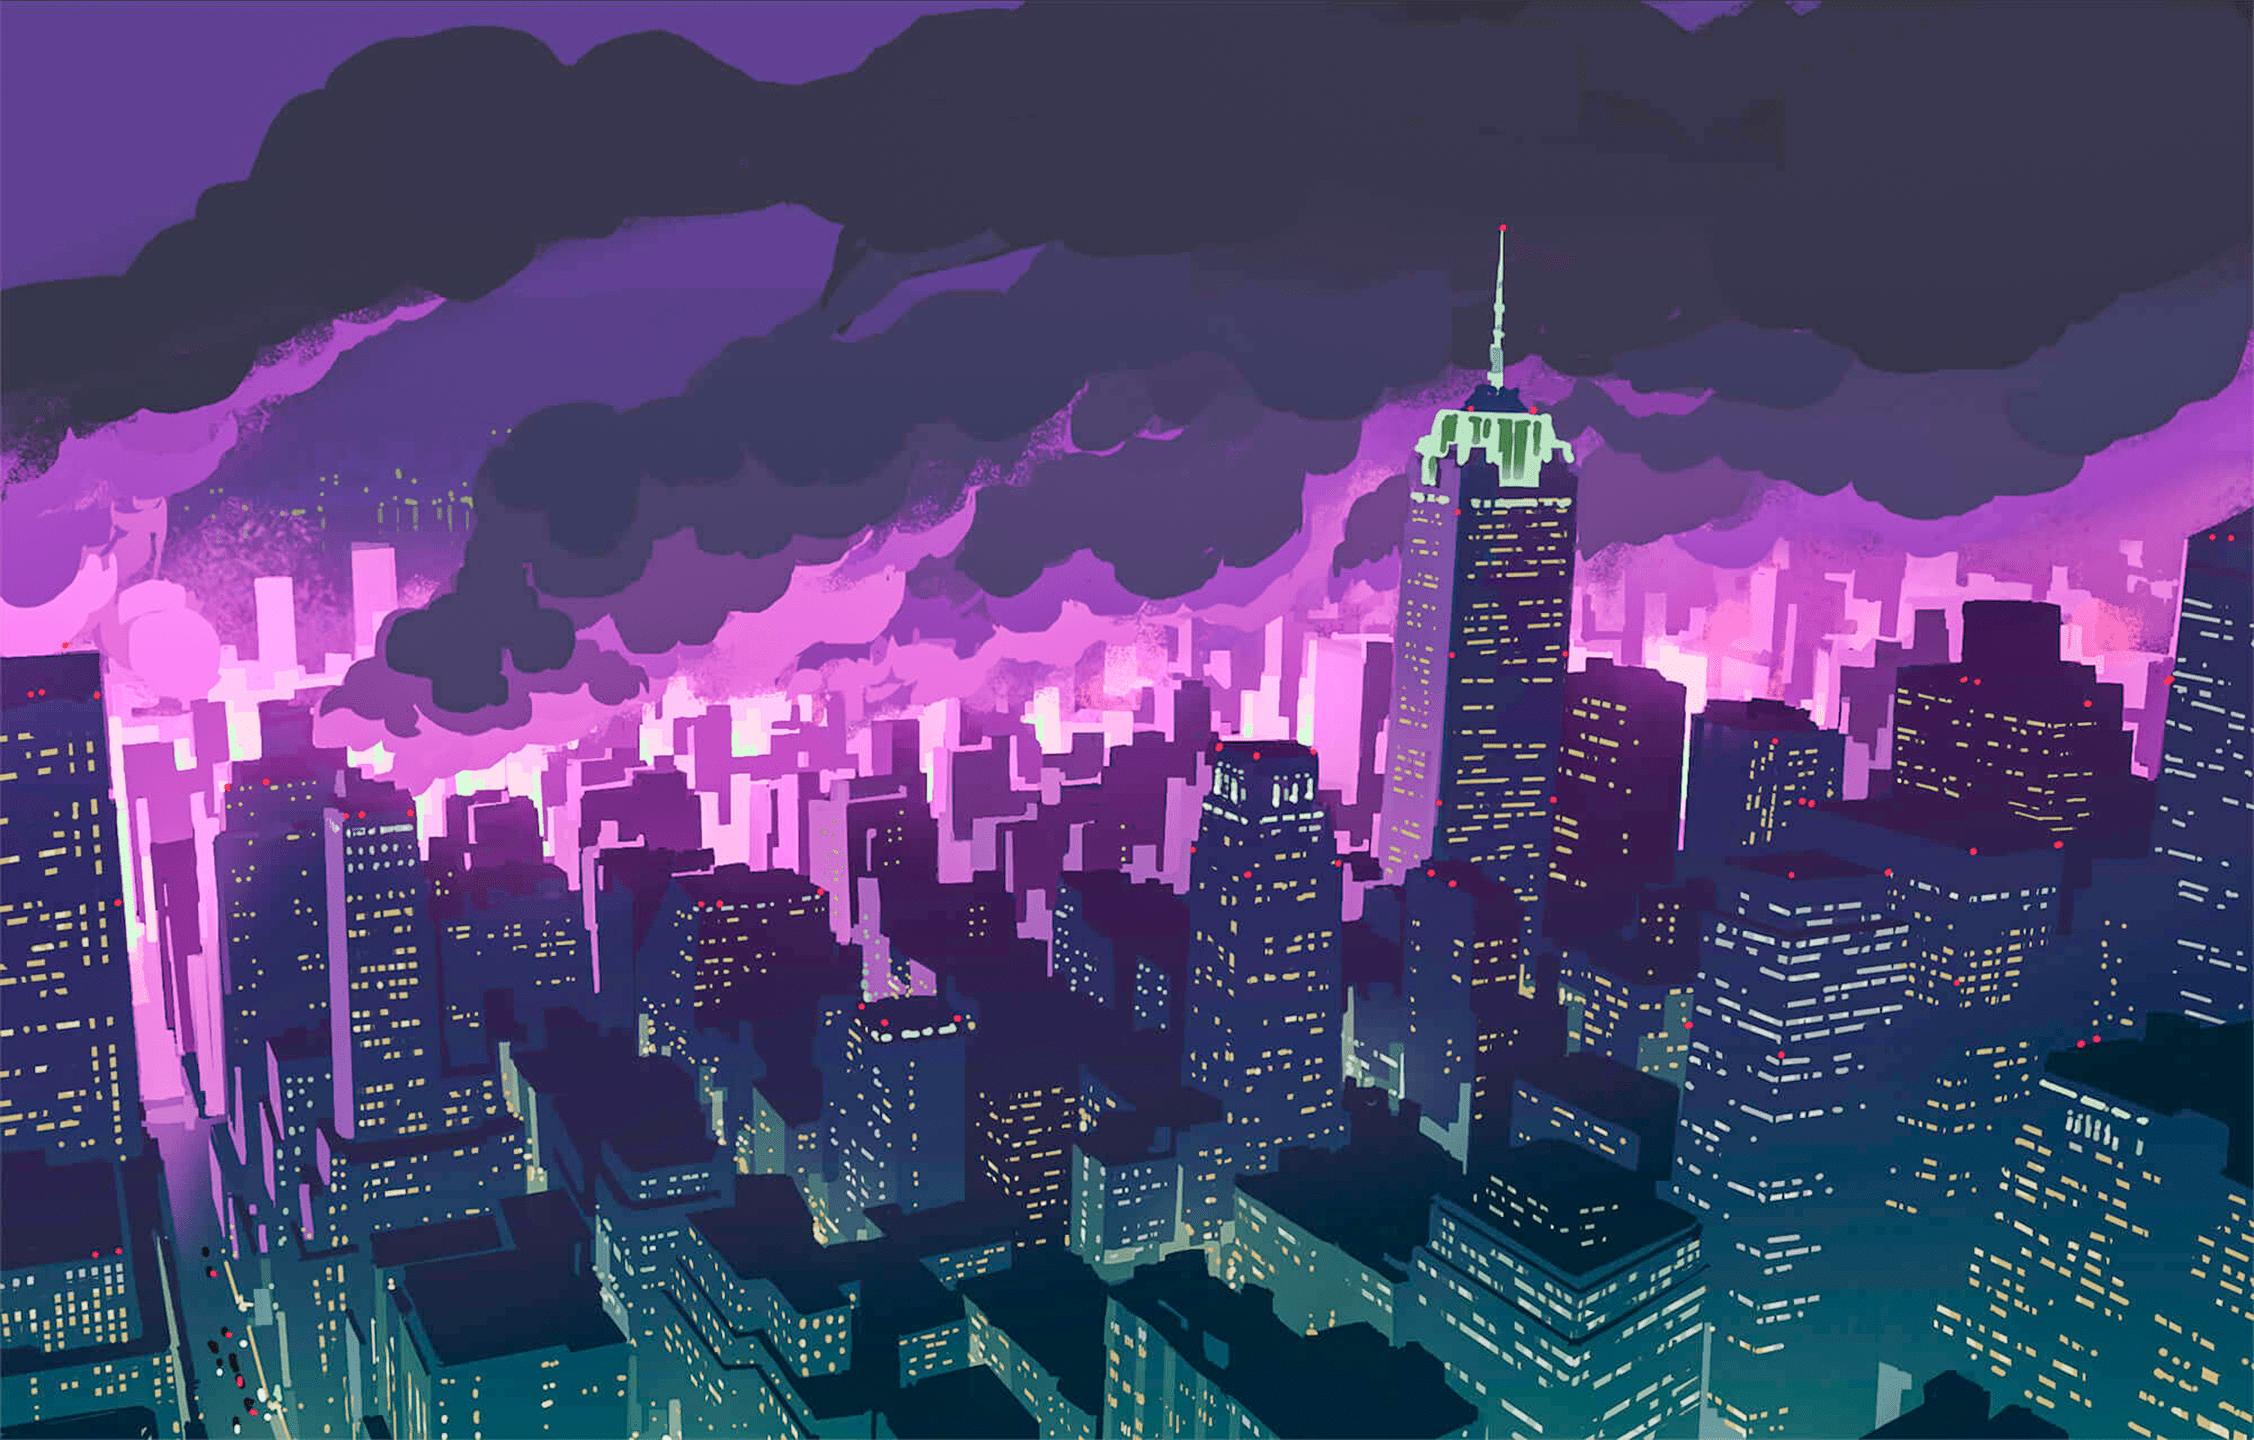 A digital painting of a cityscape at night with a purple and blue sky - City, anime city